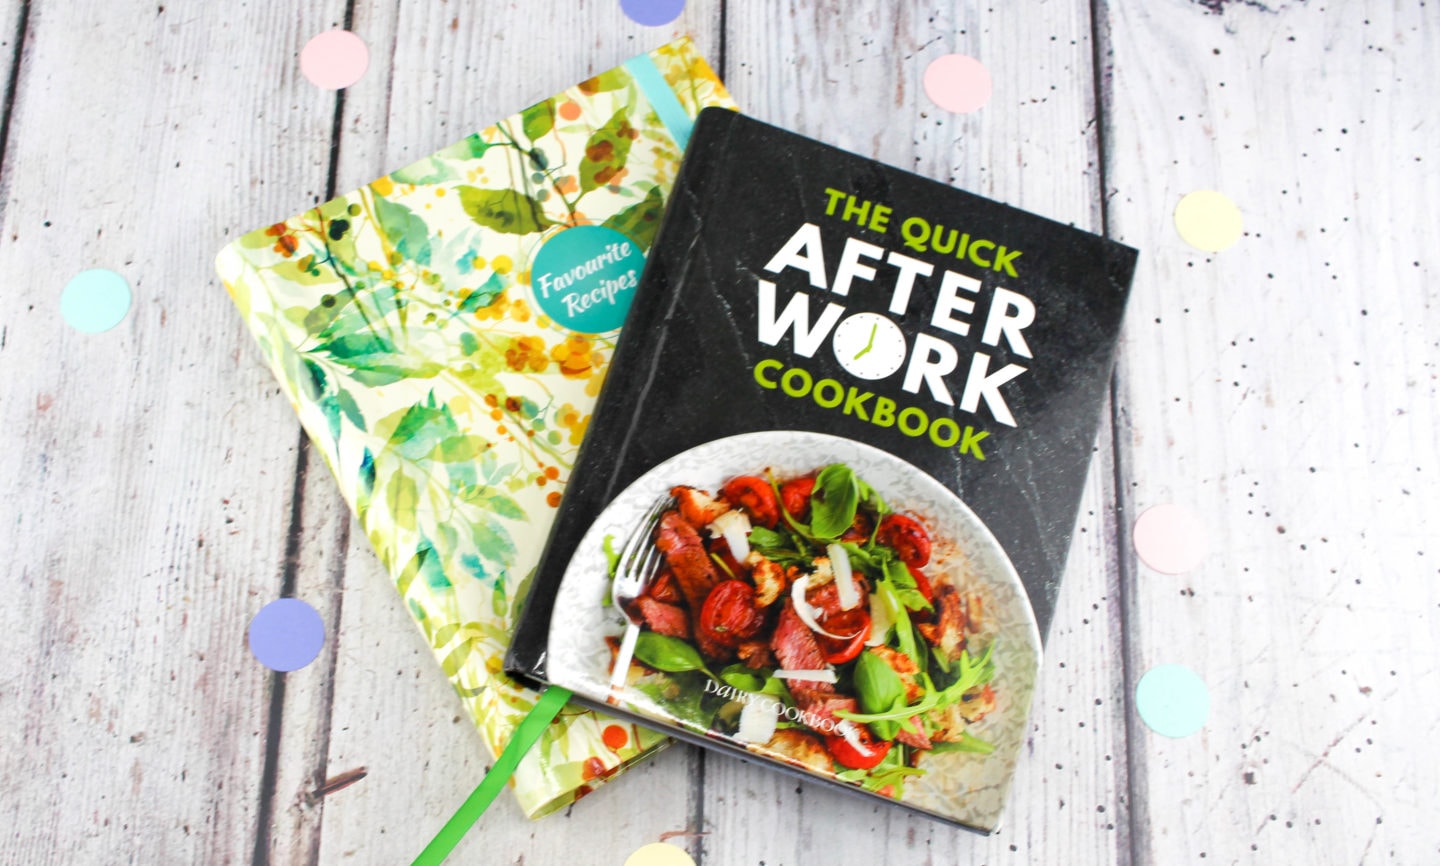 The Quick After Work CookBook & Recipe File